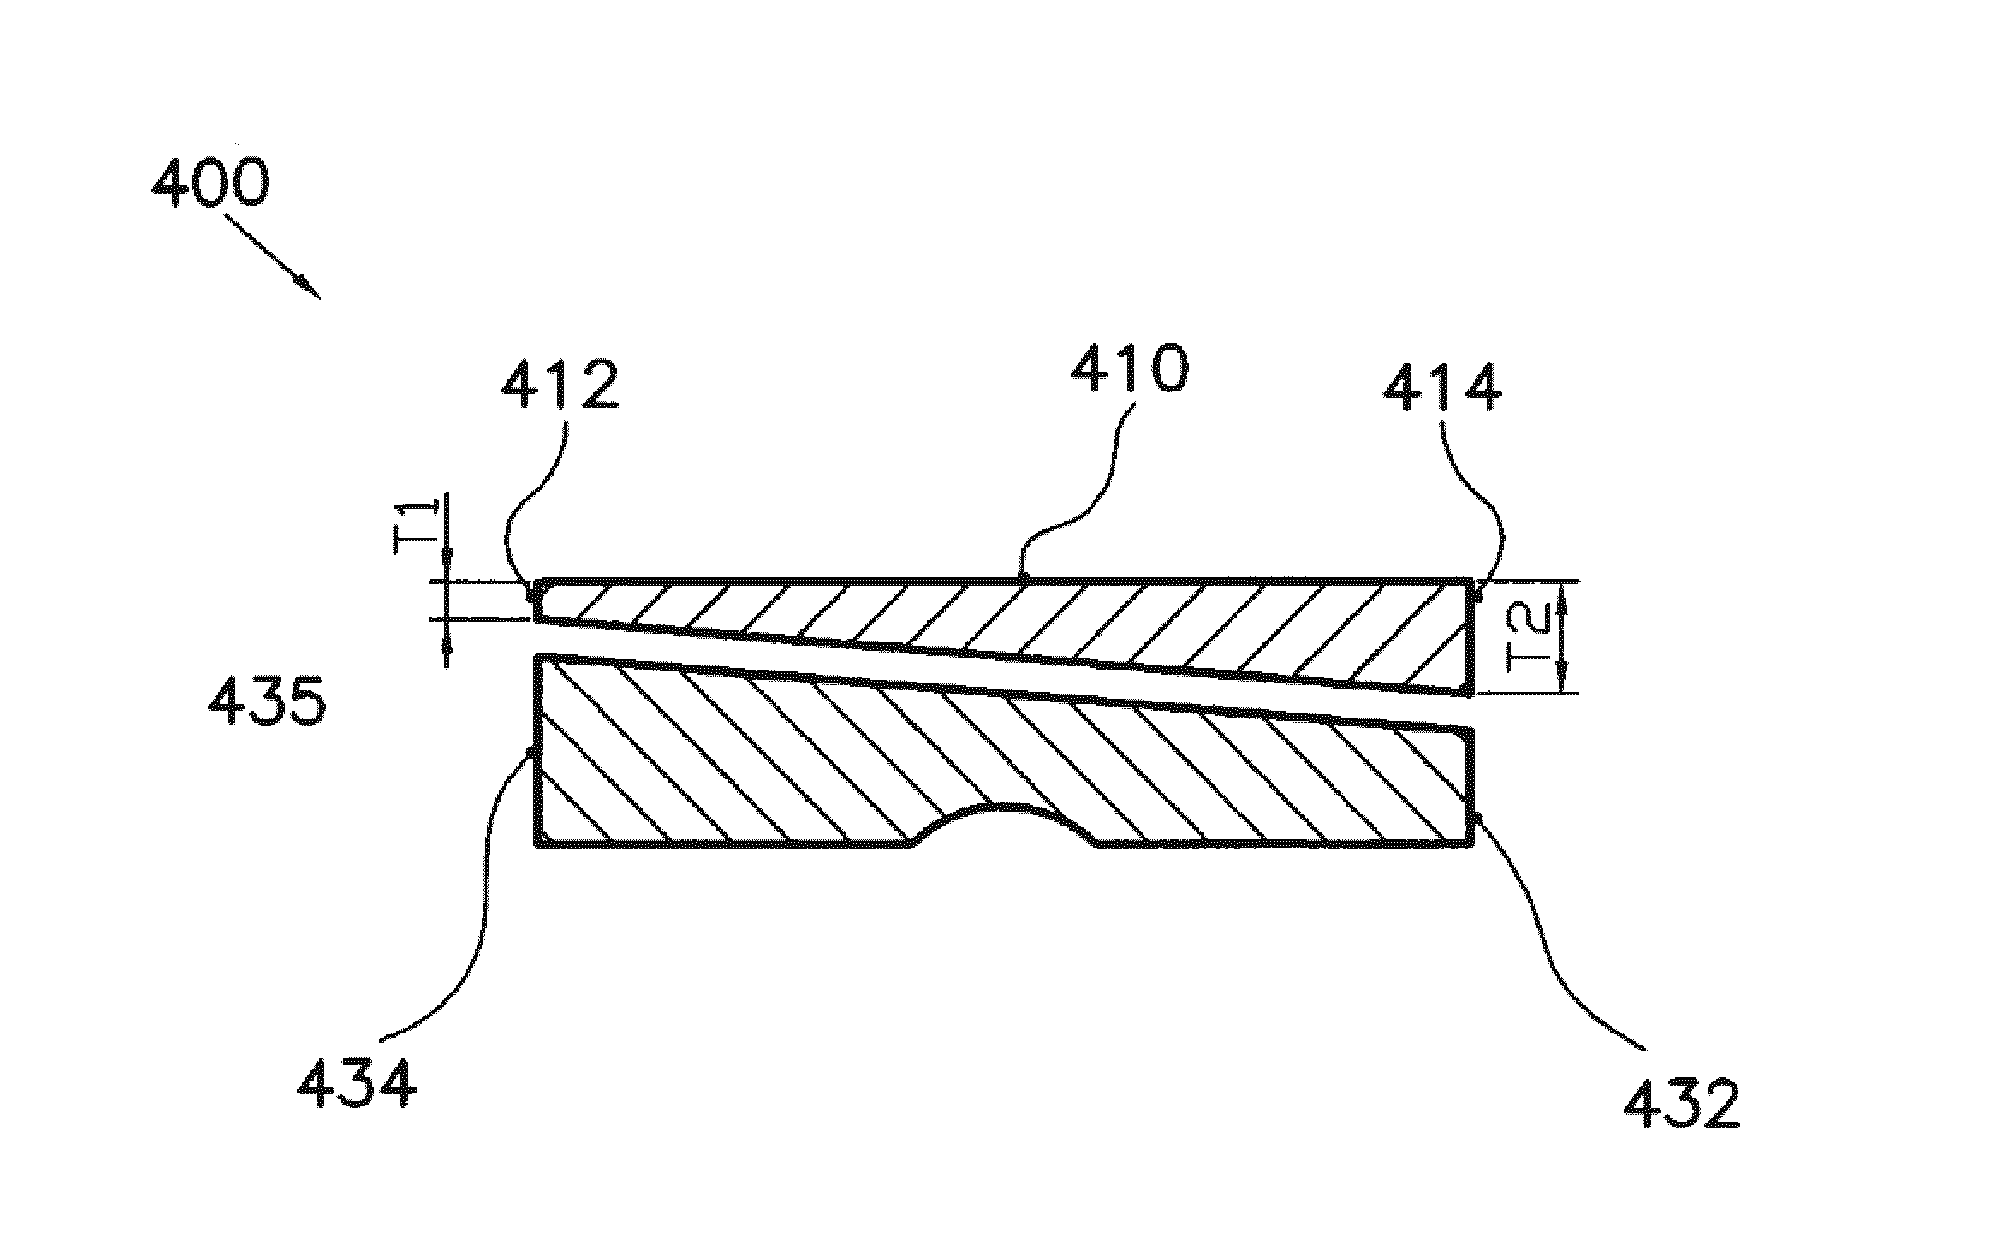 Bearing assembly and method